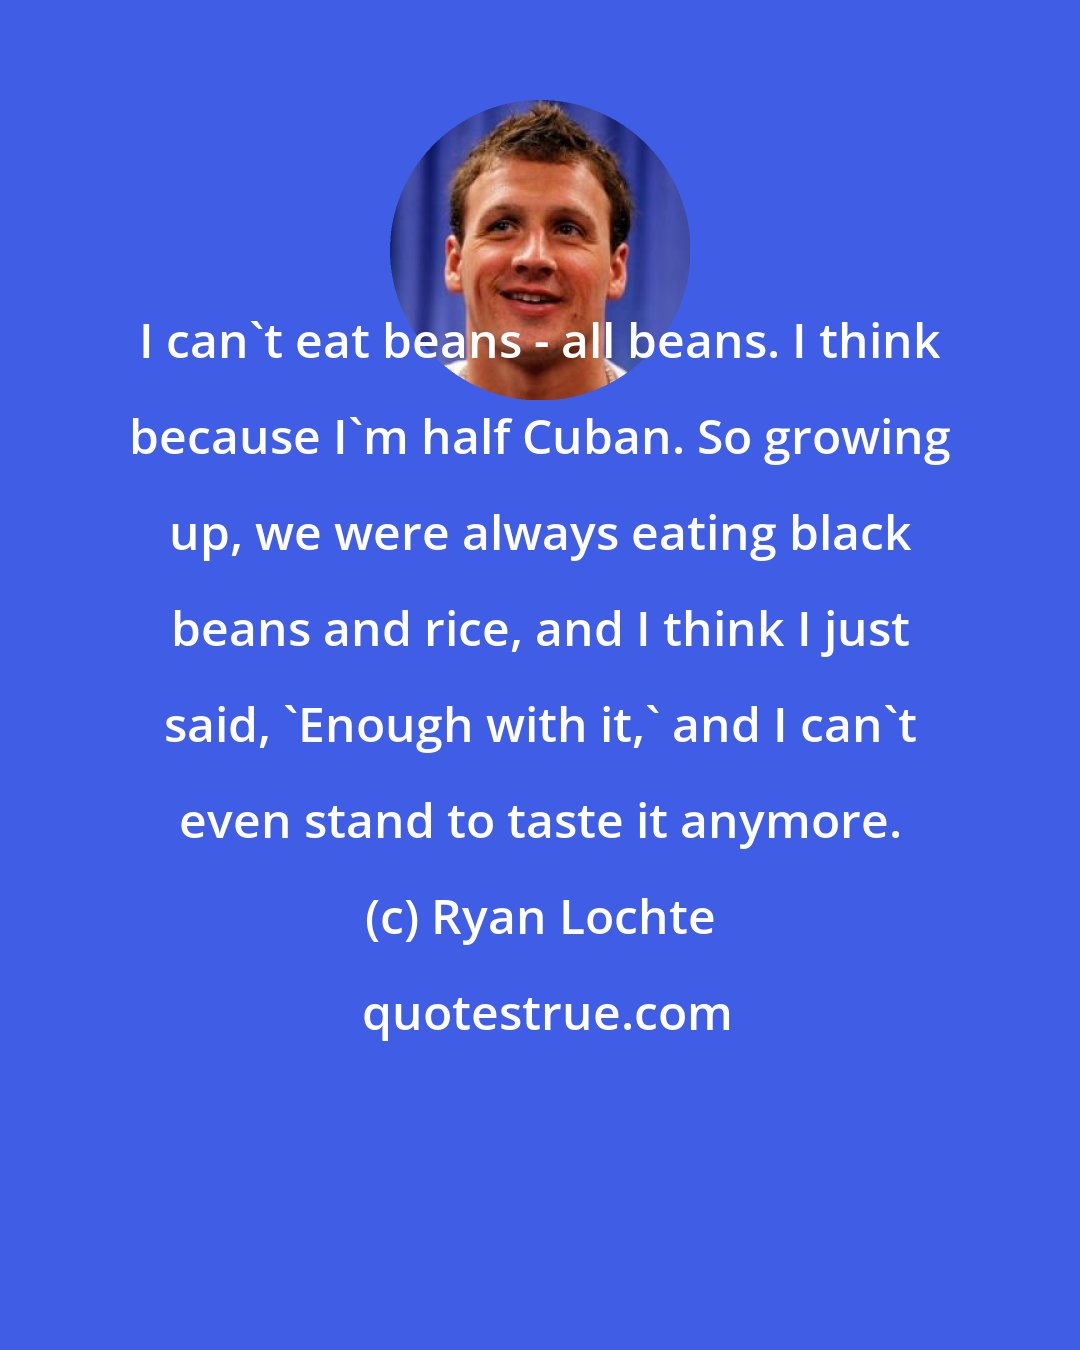 Ryan Lochte: I can't eat beans - all beans. I think because I'm half Cuban. So growing up, we were always eating black beans and rice, and I think I just said, 'Enough with it,' and I can't even stand to taste it anymore.